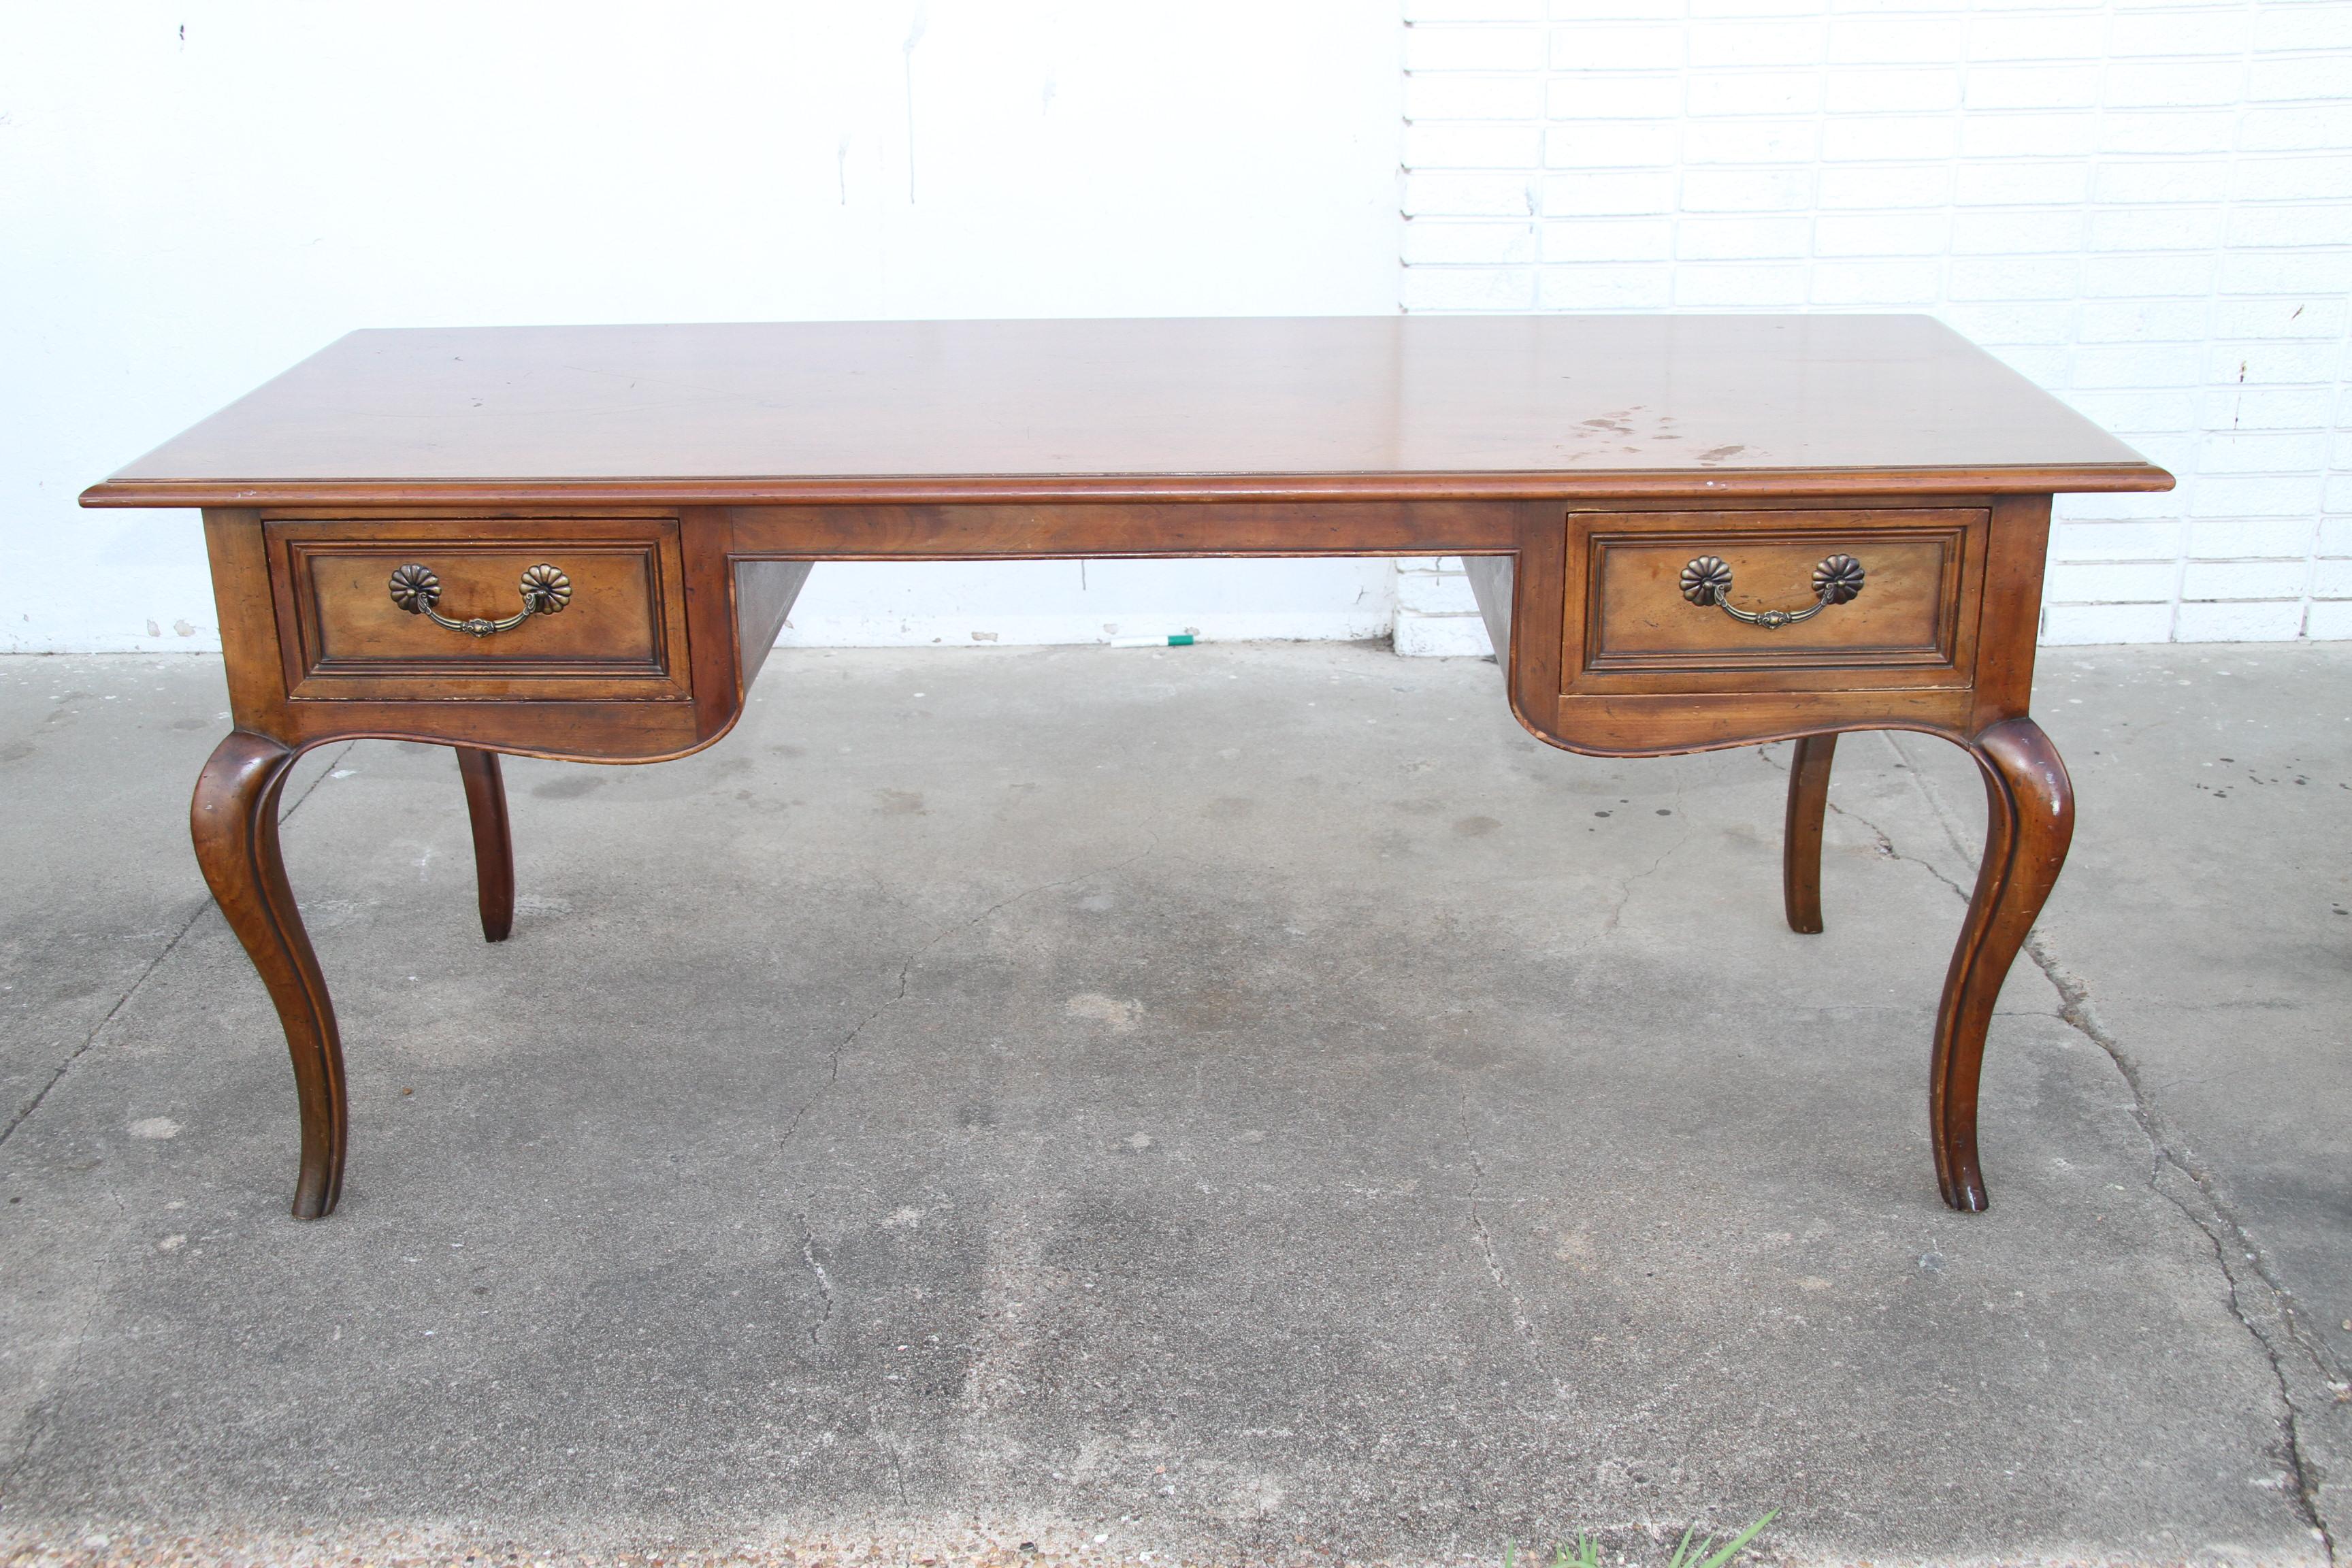 Mid Century Louis XV Queen Anne Style Desk by Baker Furniture


French Provincial Louis XV style writing desk features cabriole legs and a scalloped apron edge.  There is ample knee-hole space, and two stationary storage drawers with brass